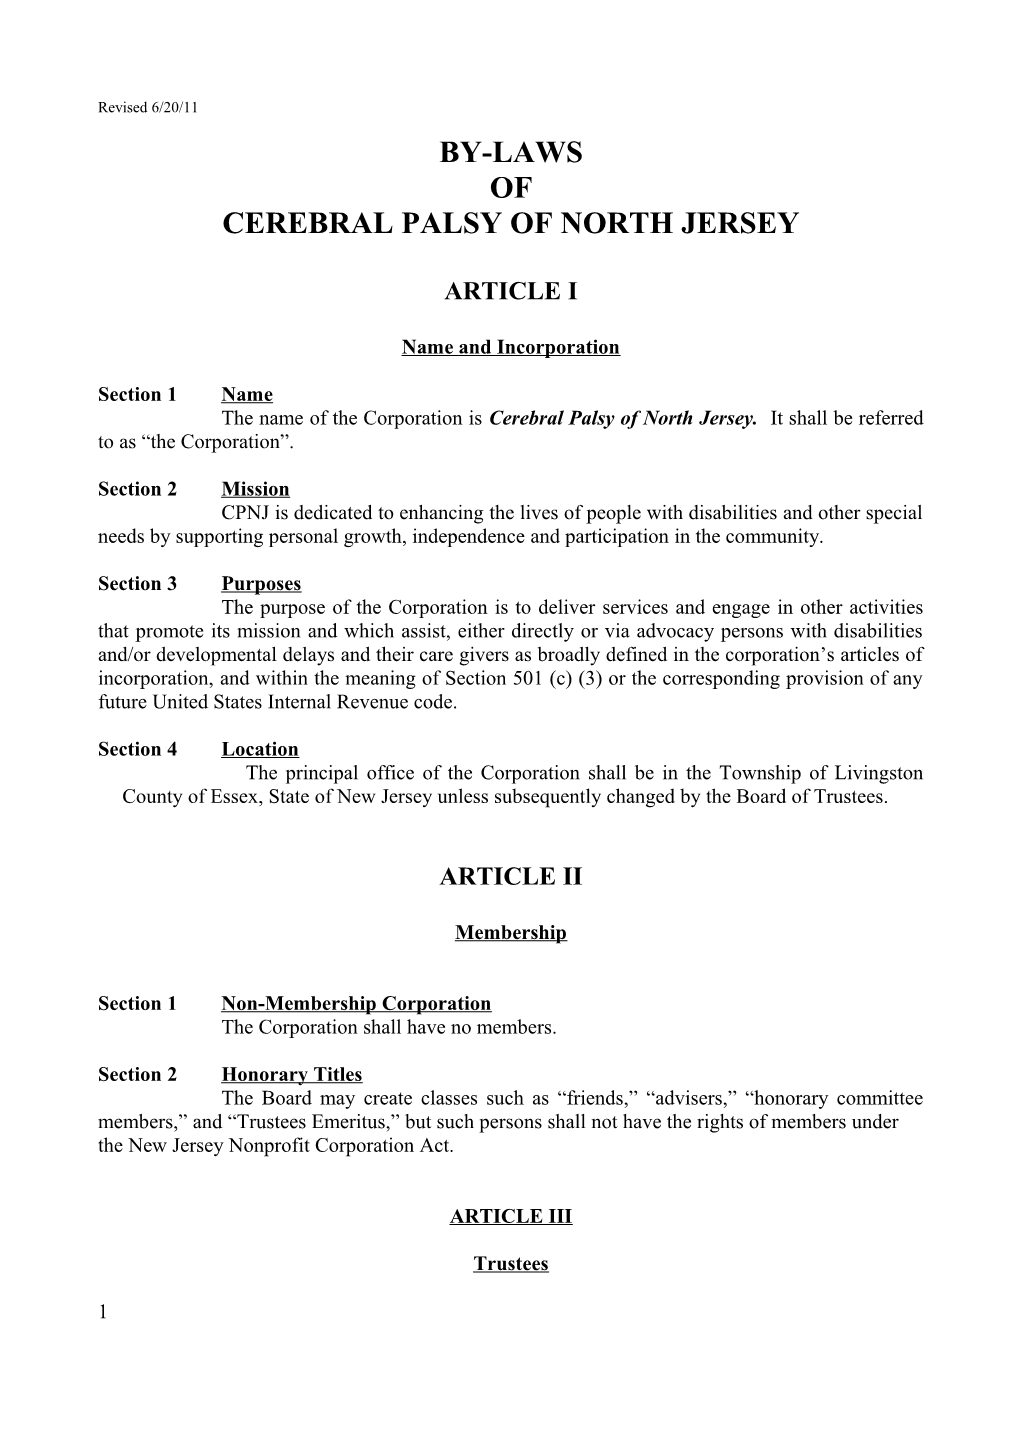 Cerebral Palsy of North Jersey